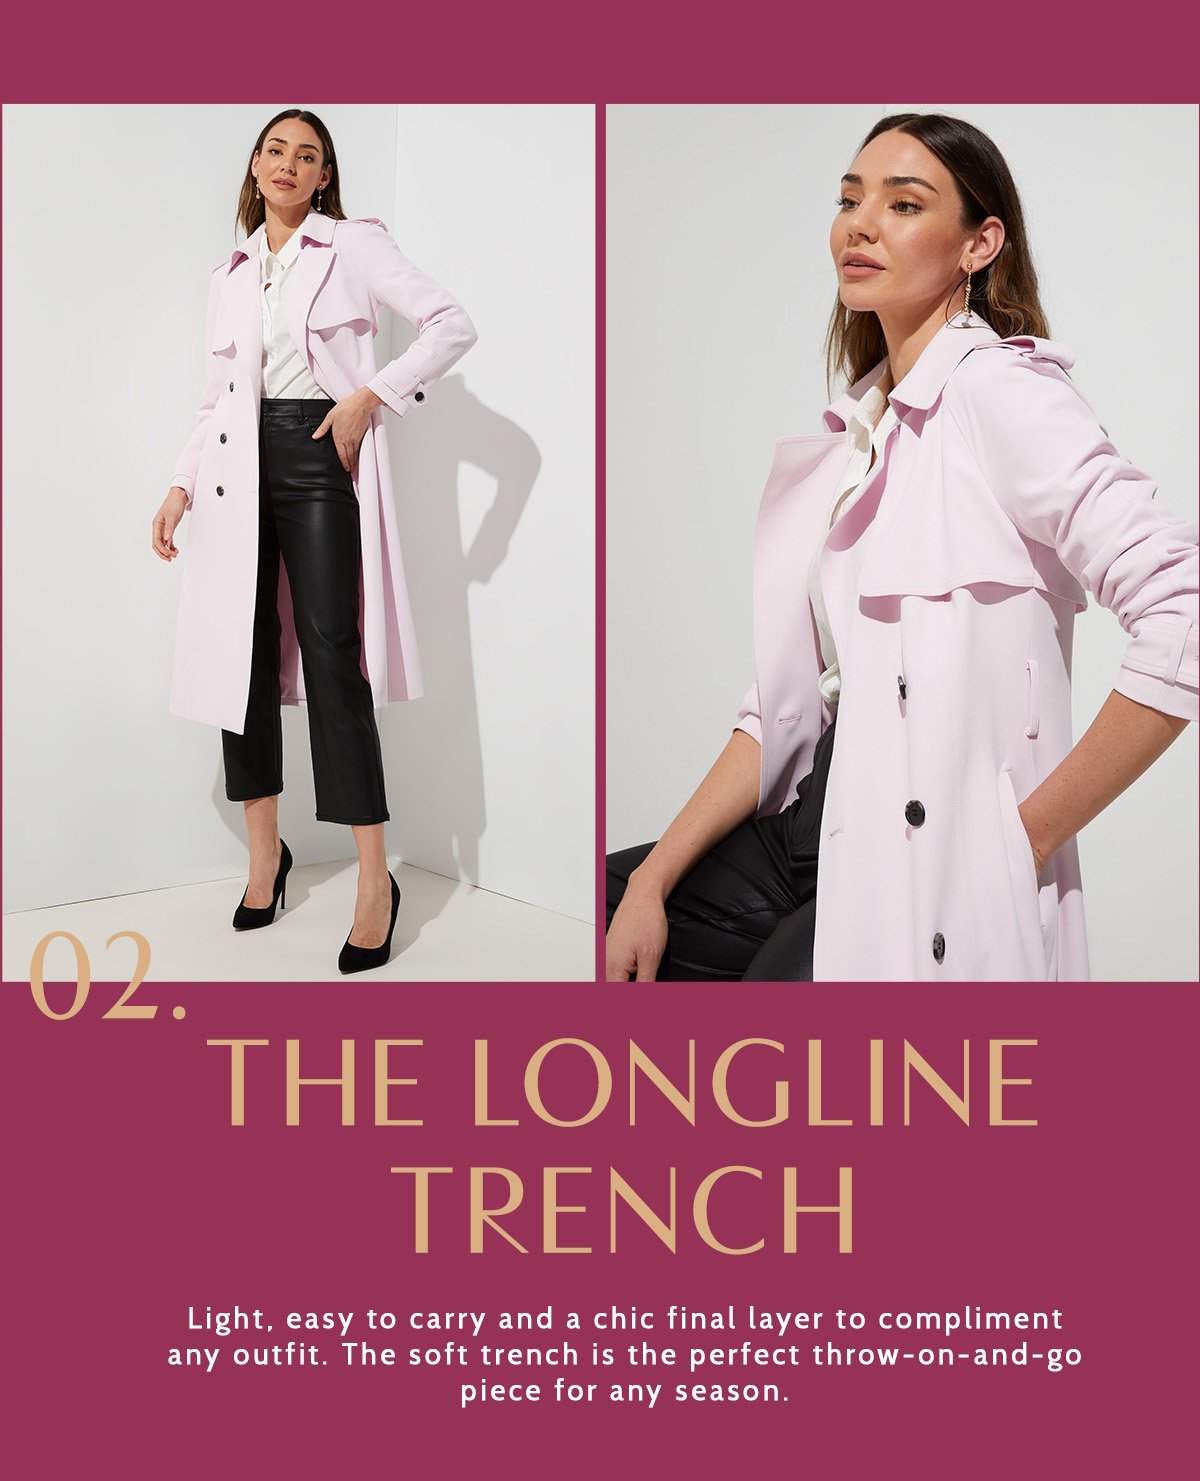 The Longline Trench. Light, easy to carry and a chic final layer to compliment any outfit. The soft trench is the perfect throw-on-and-go piece for any season.